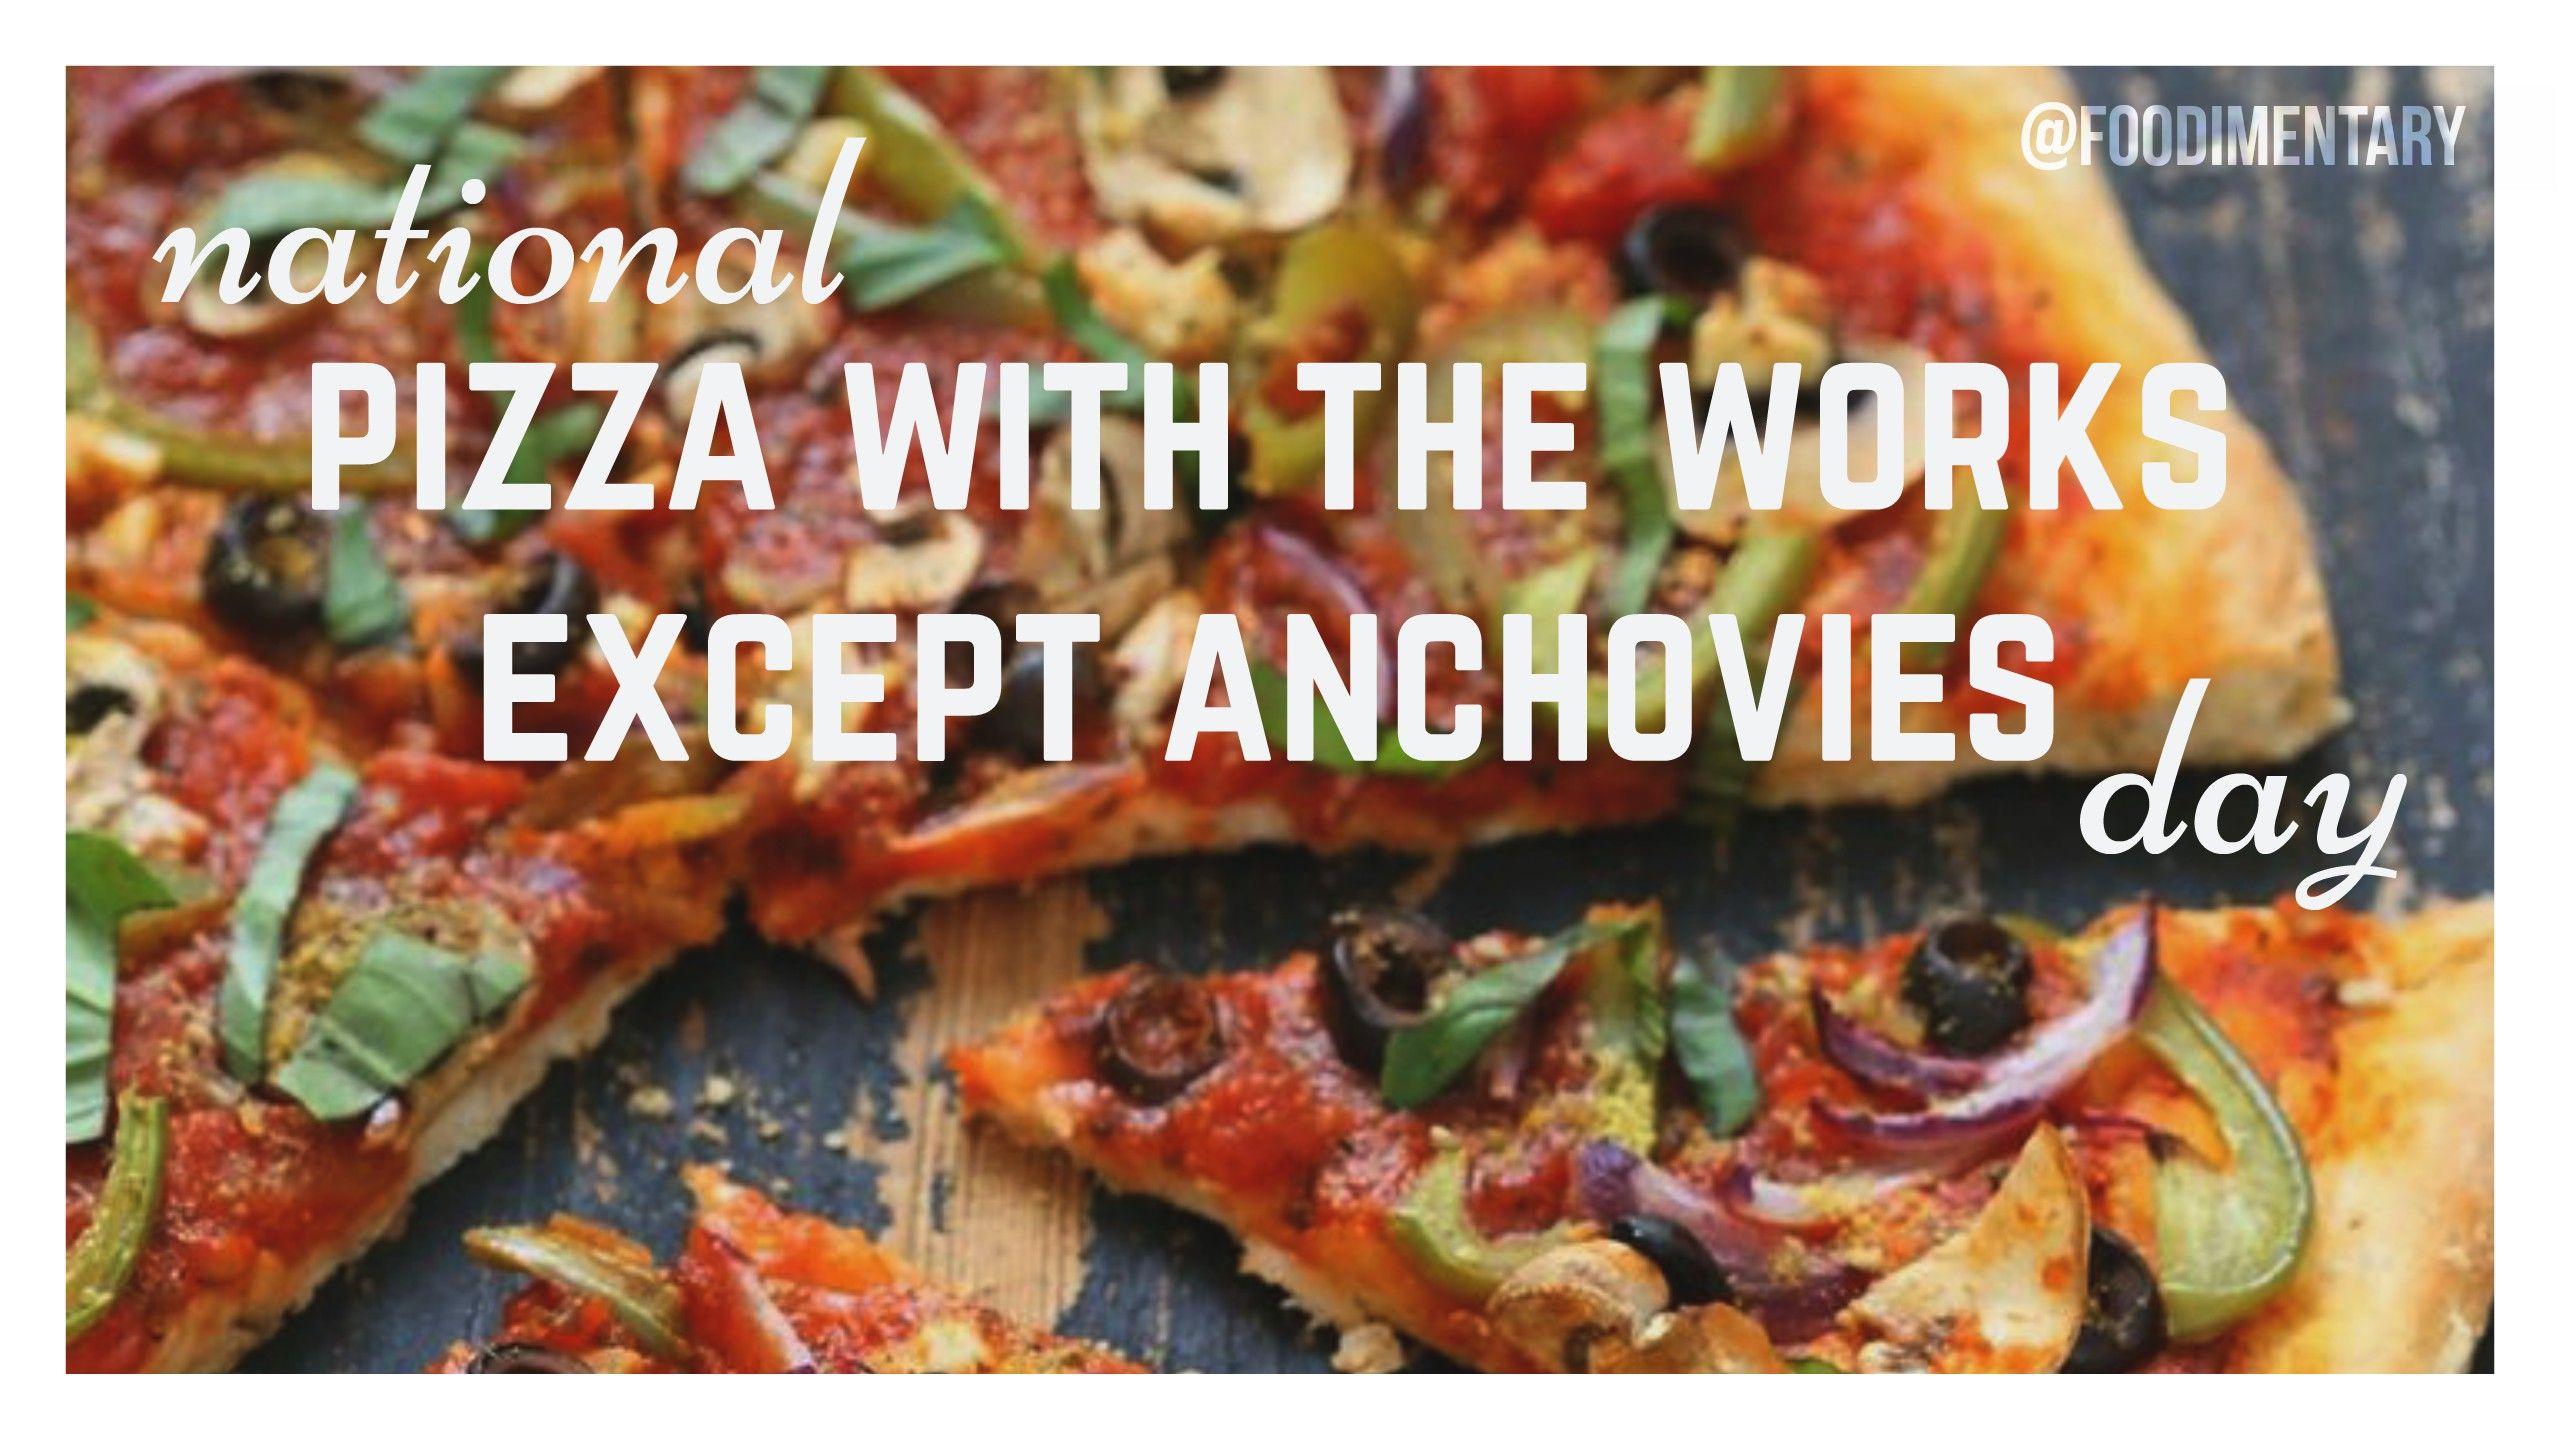 November 12th is National Pizza with the Works Except Anchovies